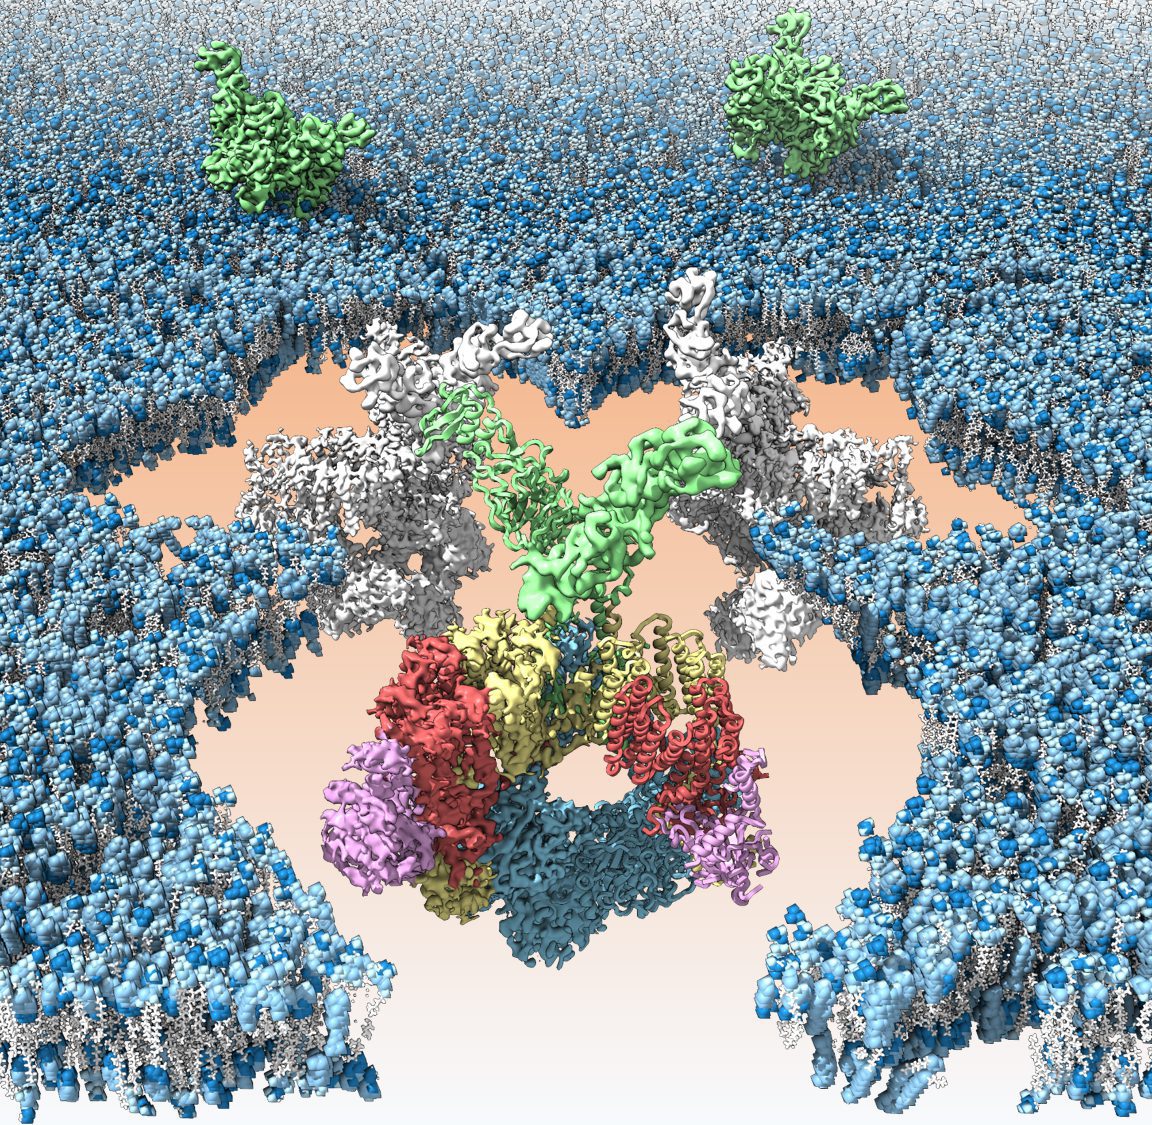 Artist’s rendering of the subcomplex that constitutes the T7SS secretion system of 